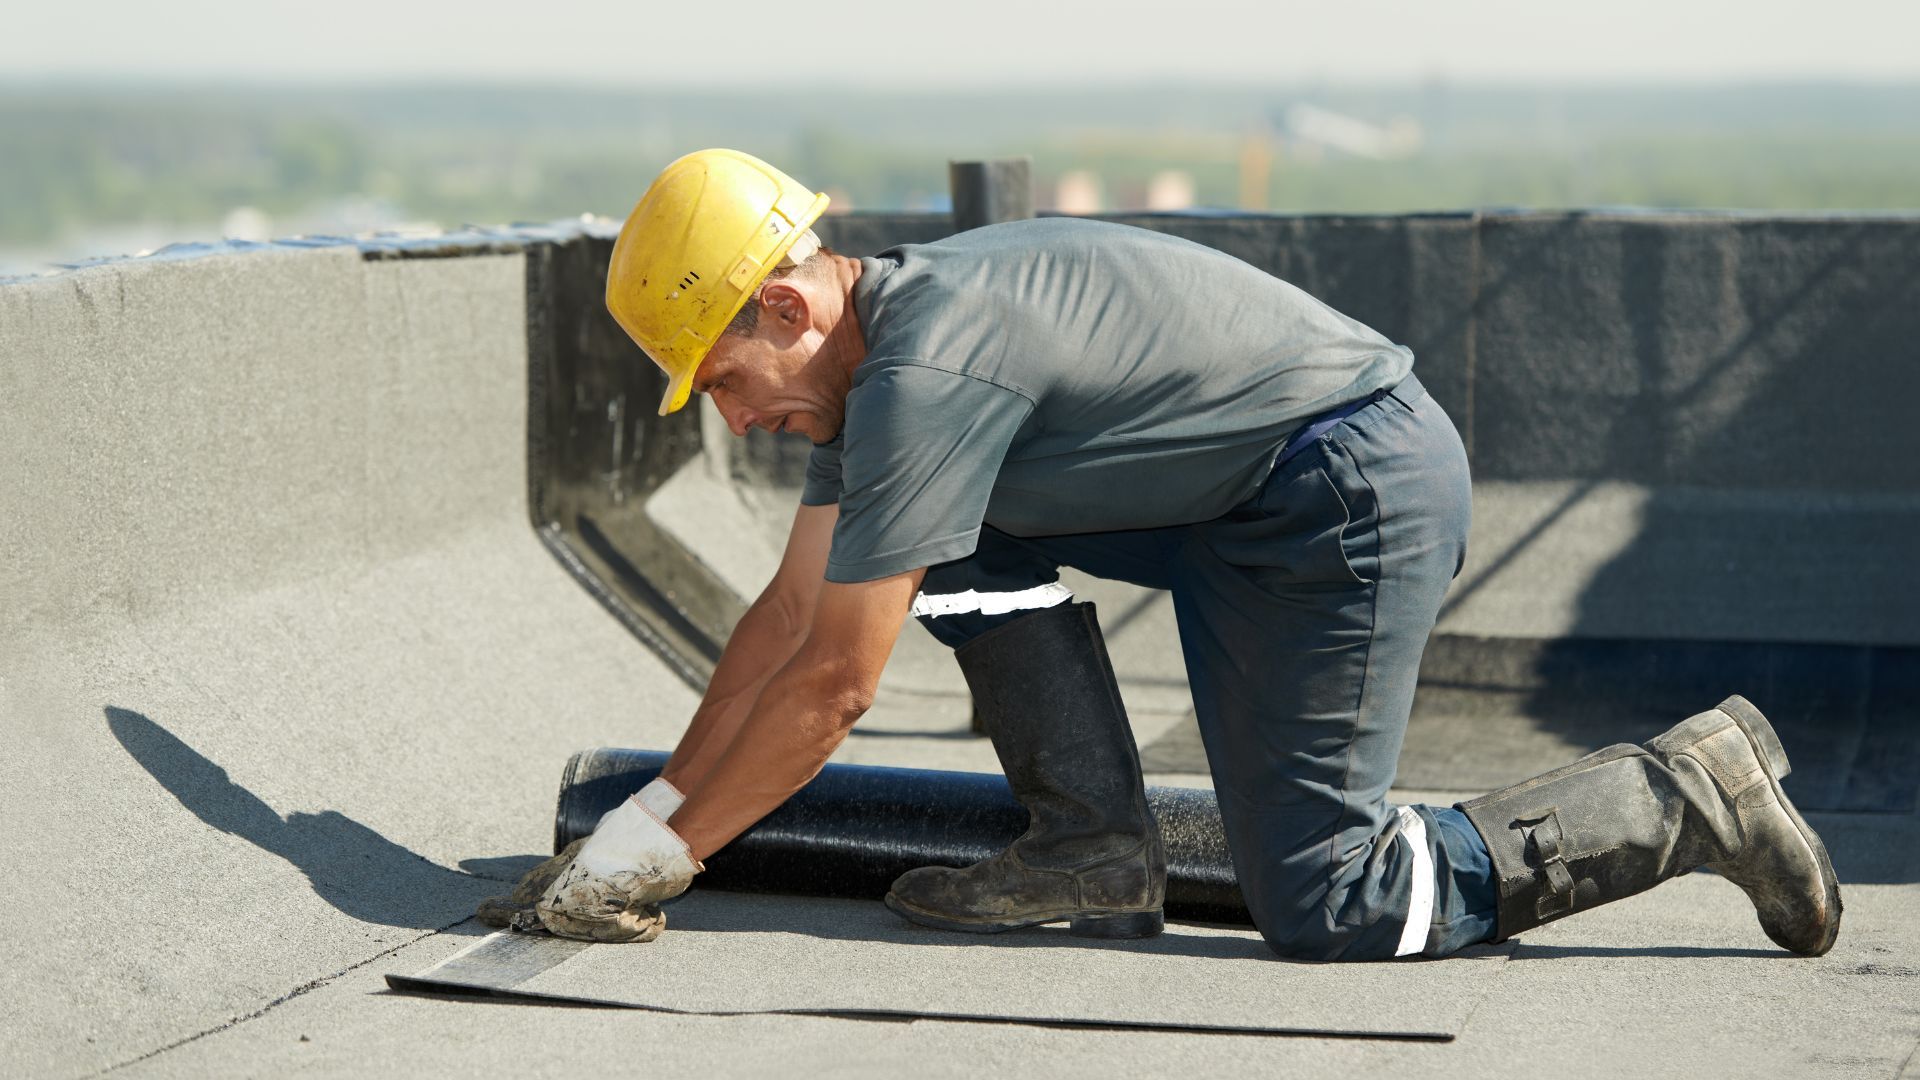 View of commercial roofer working on roof